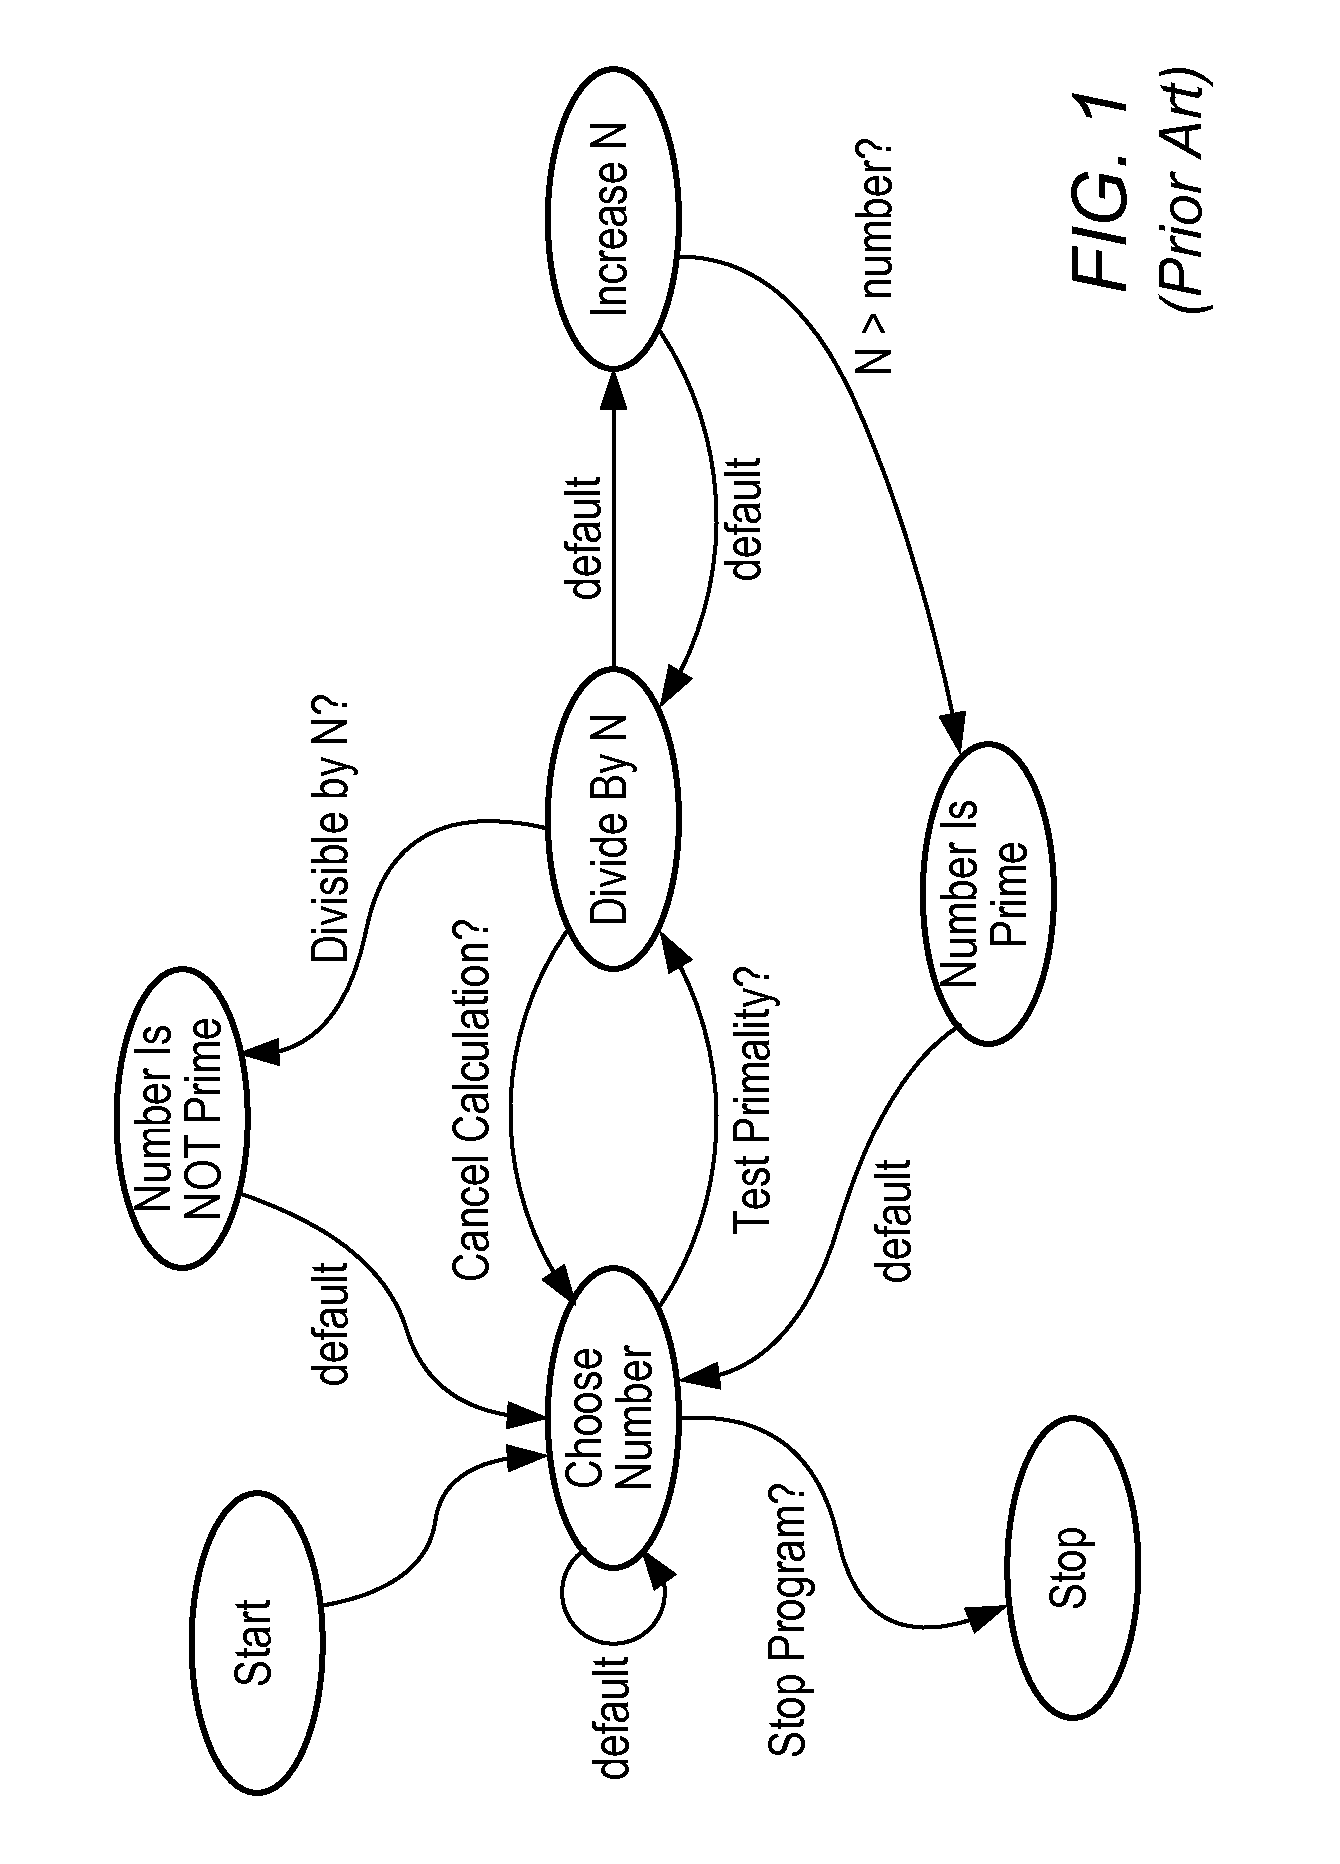 Generating a Hardware Description from a Graphical Program in Response to Receiving a Diagram with States and State Transitions